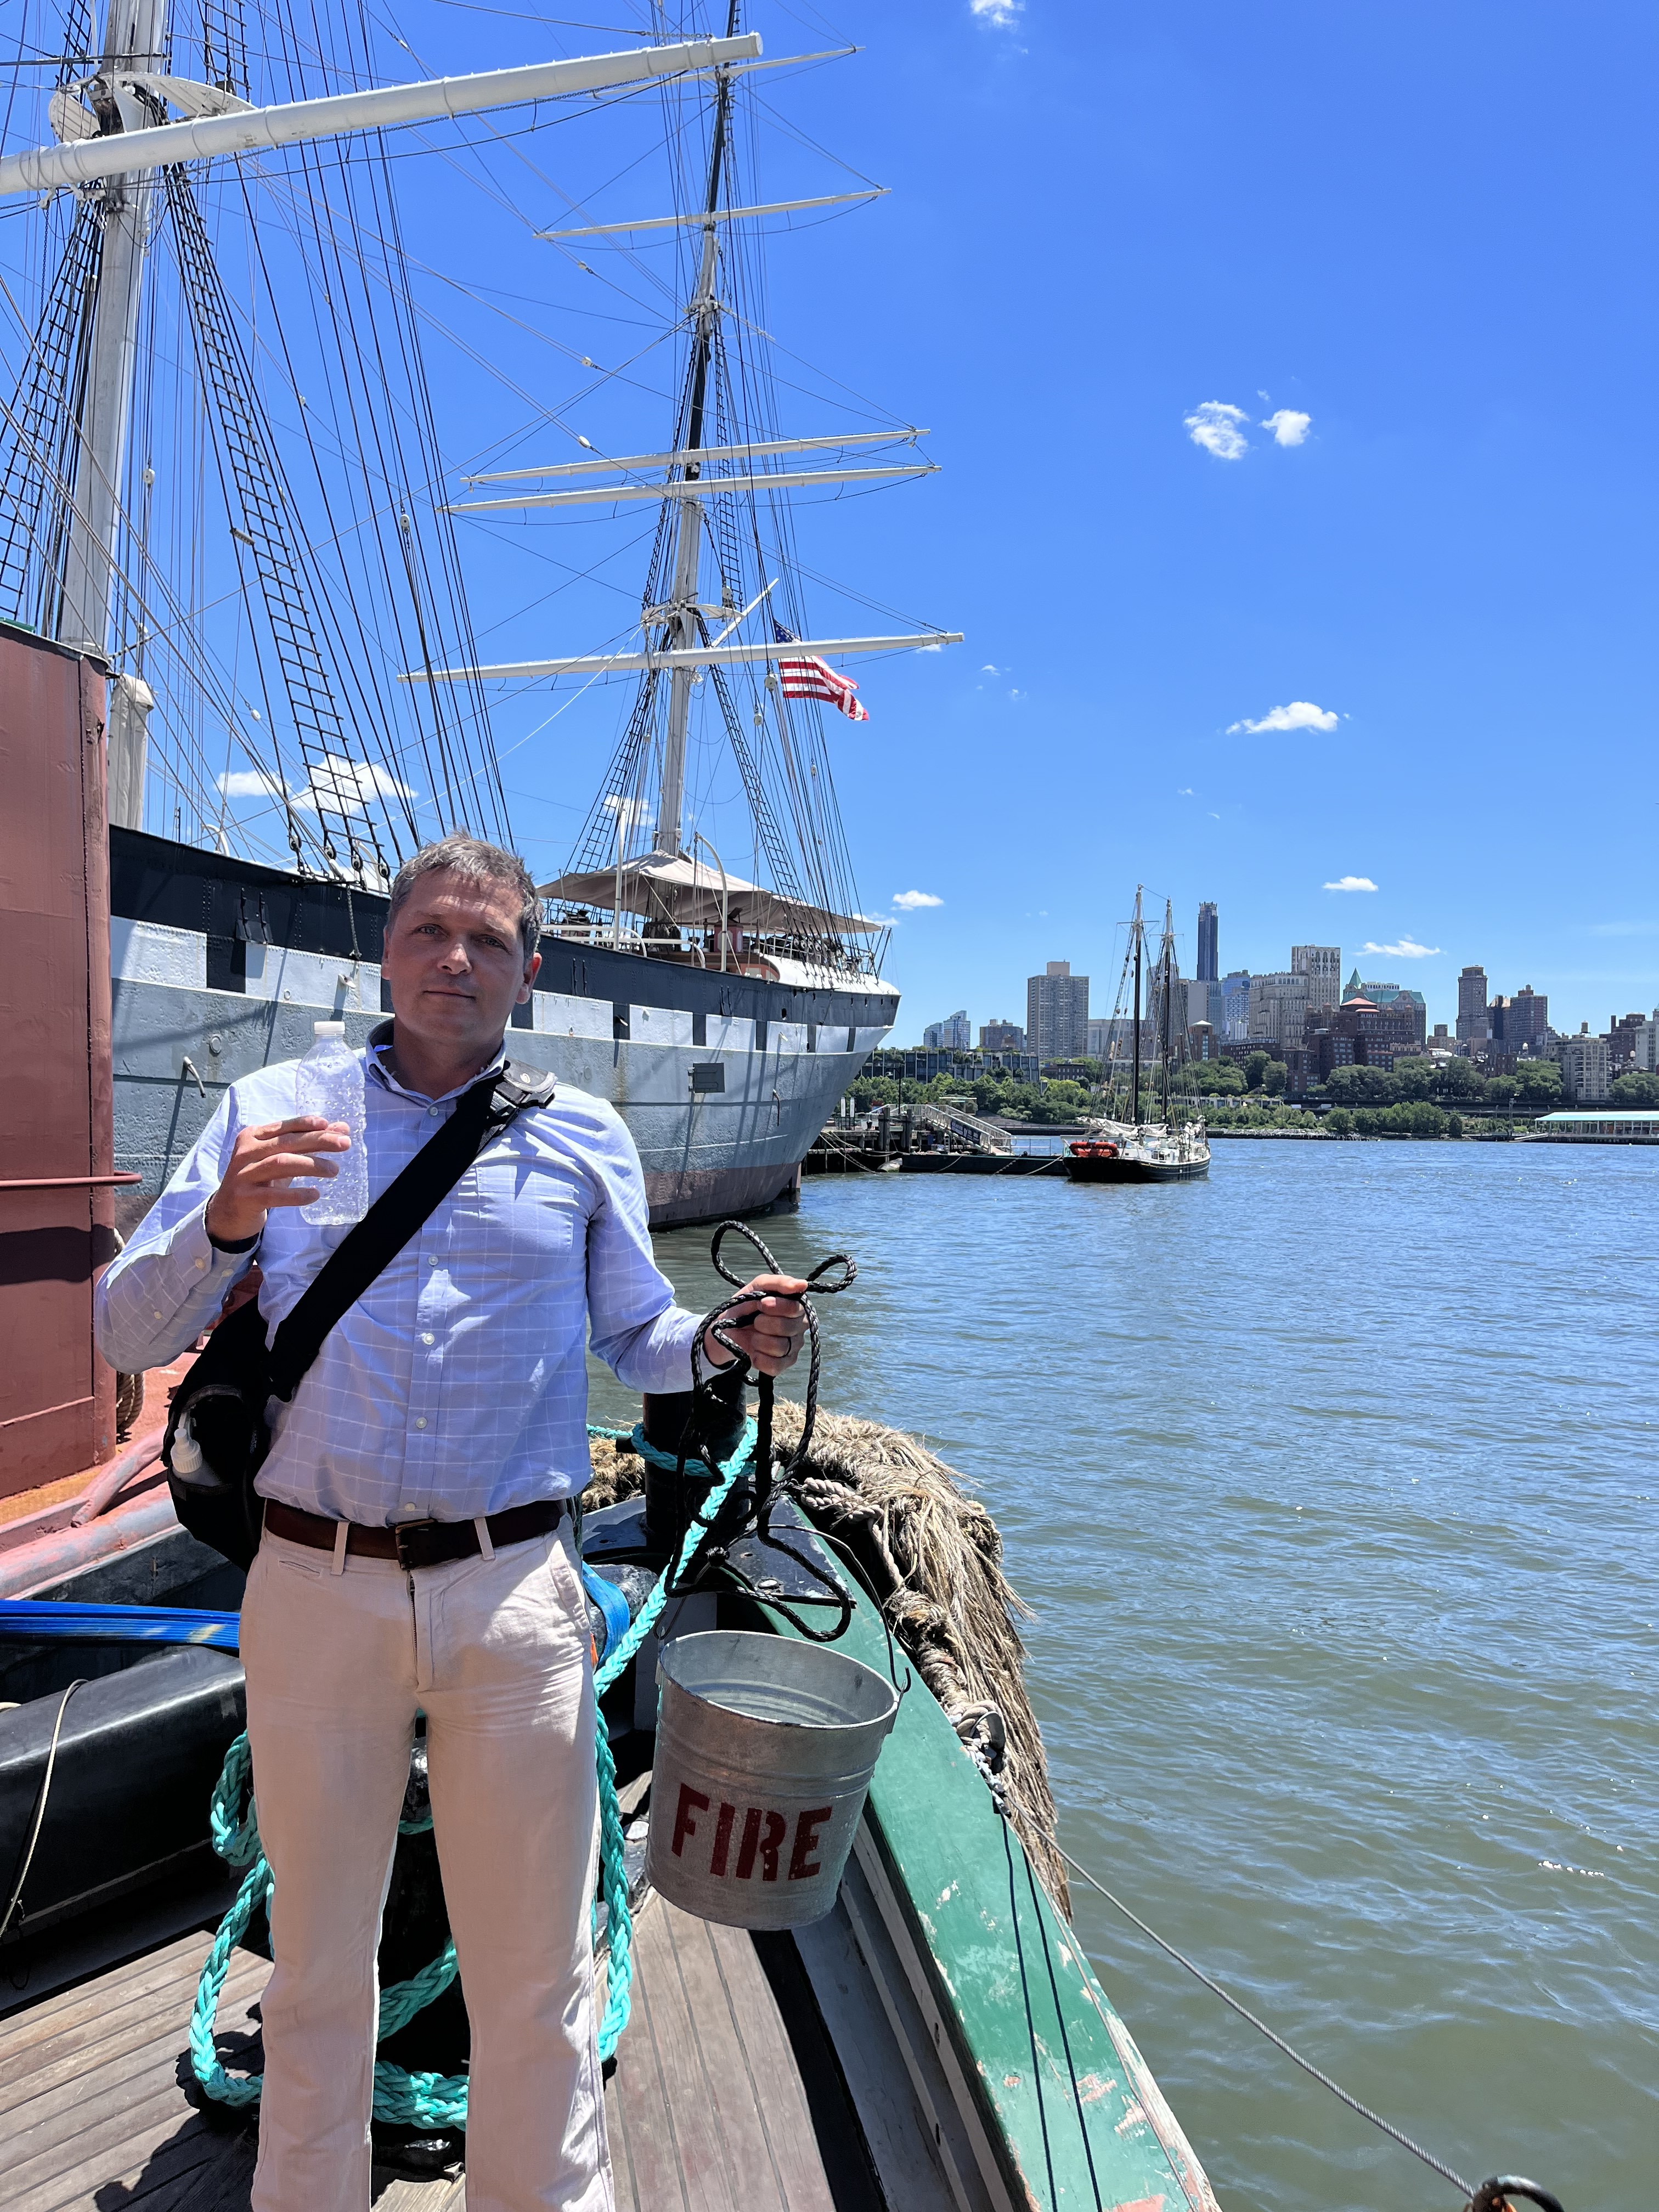 Captain Jonathan Boulware< President and CEO collected water from the deck of the Tugboat W.O. Decker, part of the South Street Seaport Museum's fleet, Pier 16, Manhattan, NY, NY